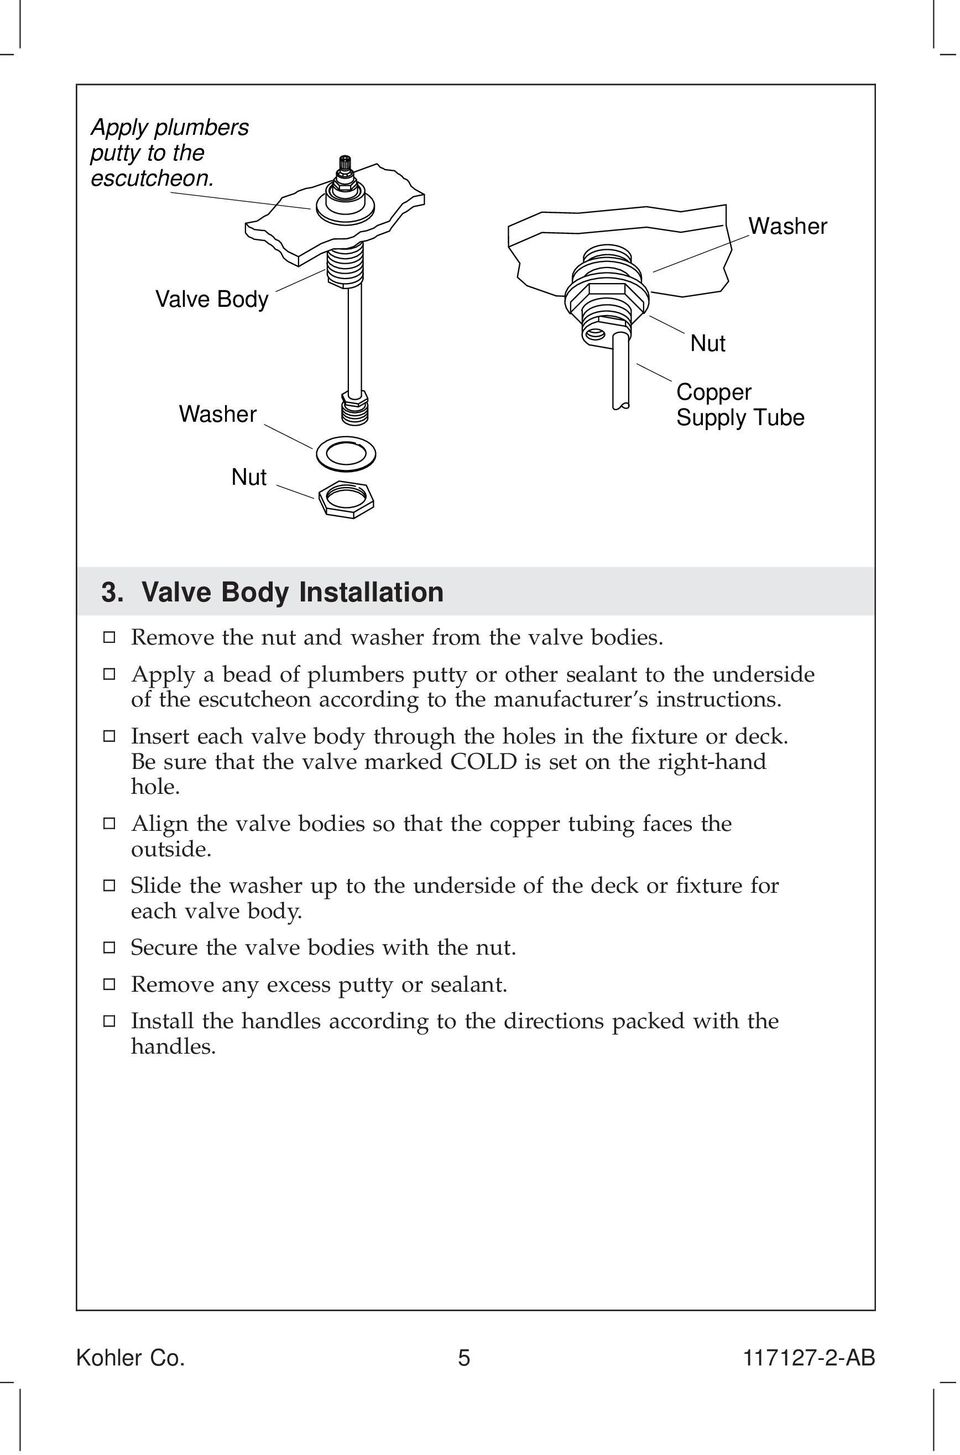 Insert each valve body through the holes in the fixture or deck. Be sure that the valve marked COLD is set on the right-hand hole.